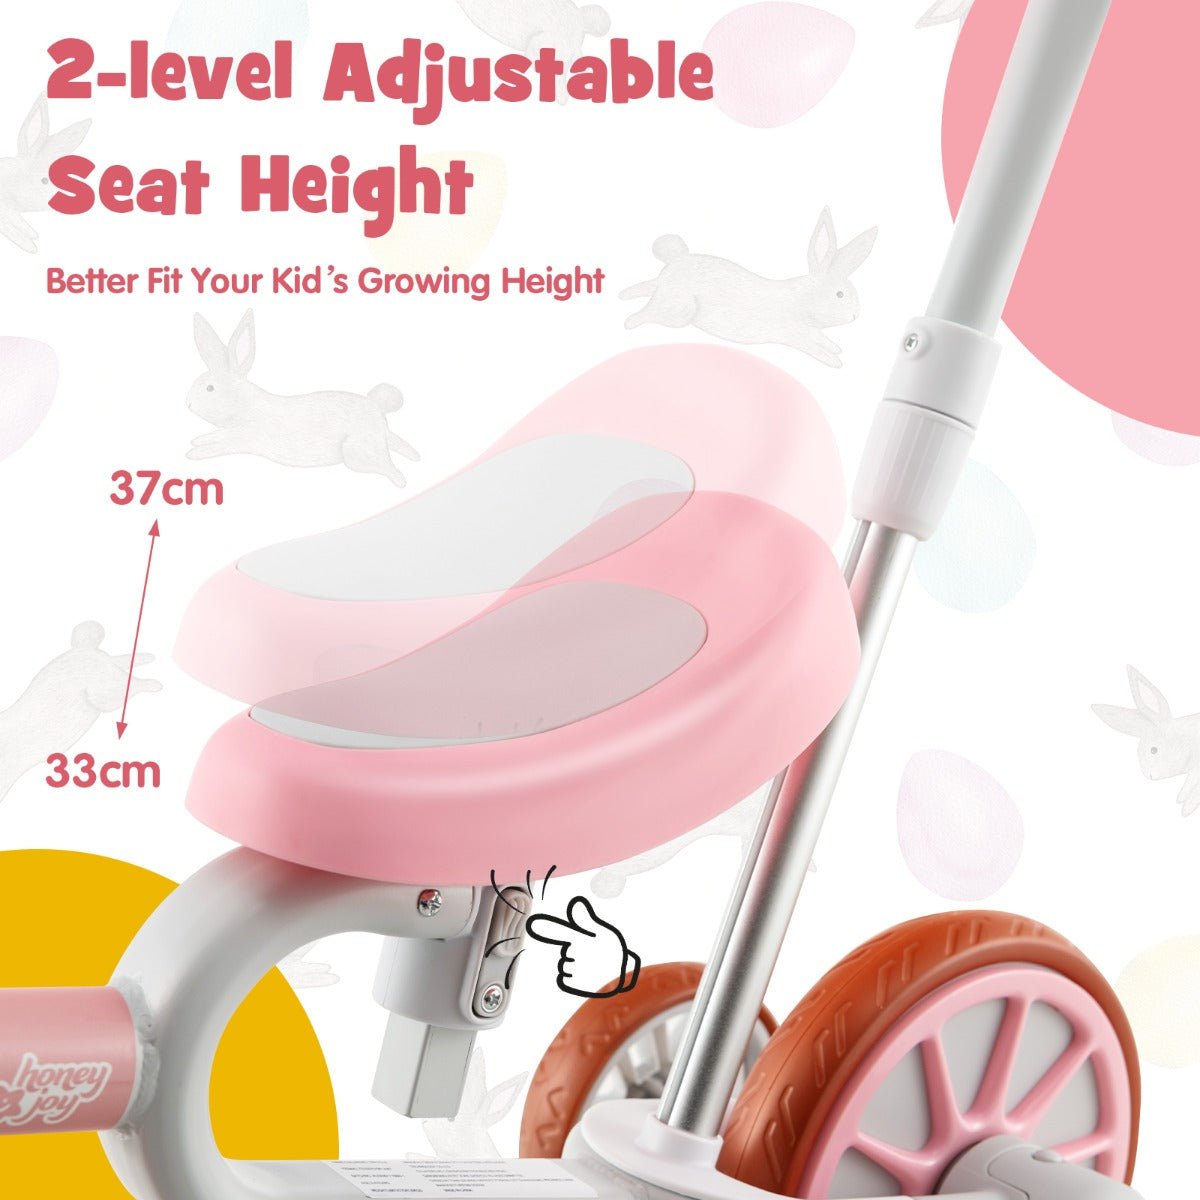 Adjustable Push Handle Trike Bike - Pink 4-in-1 for Ages 2-4